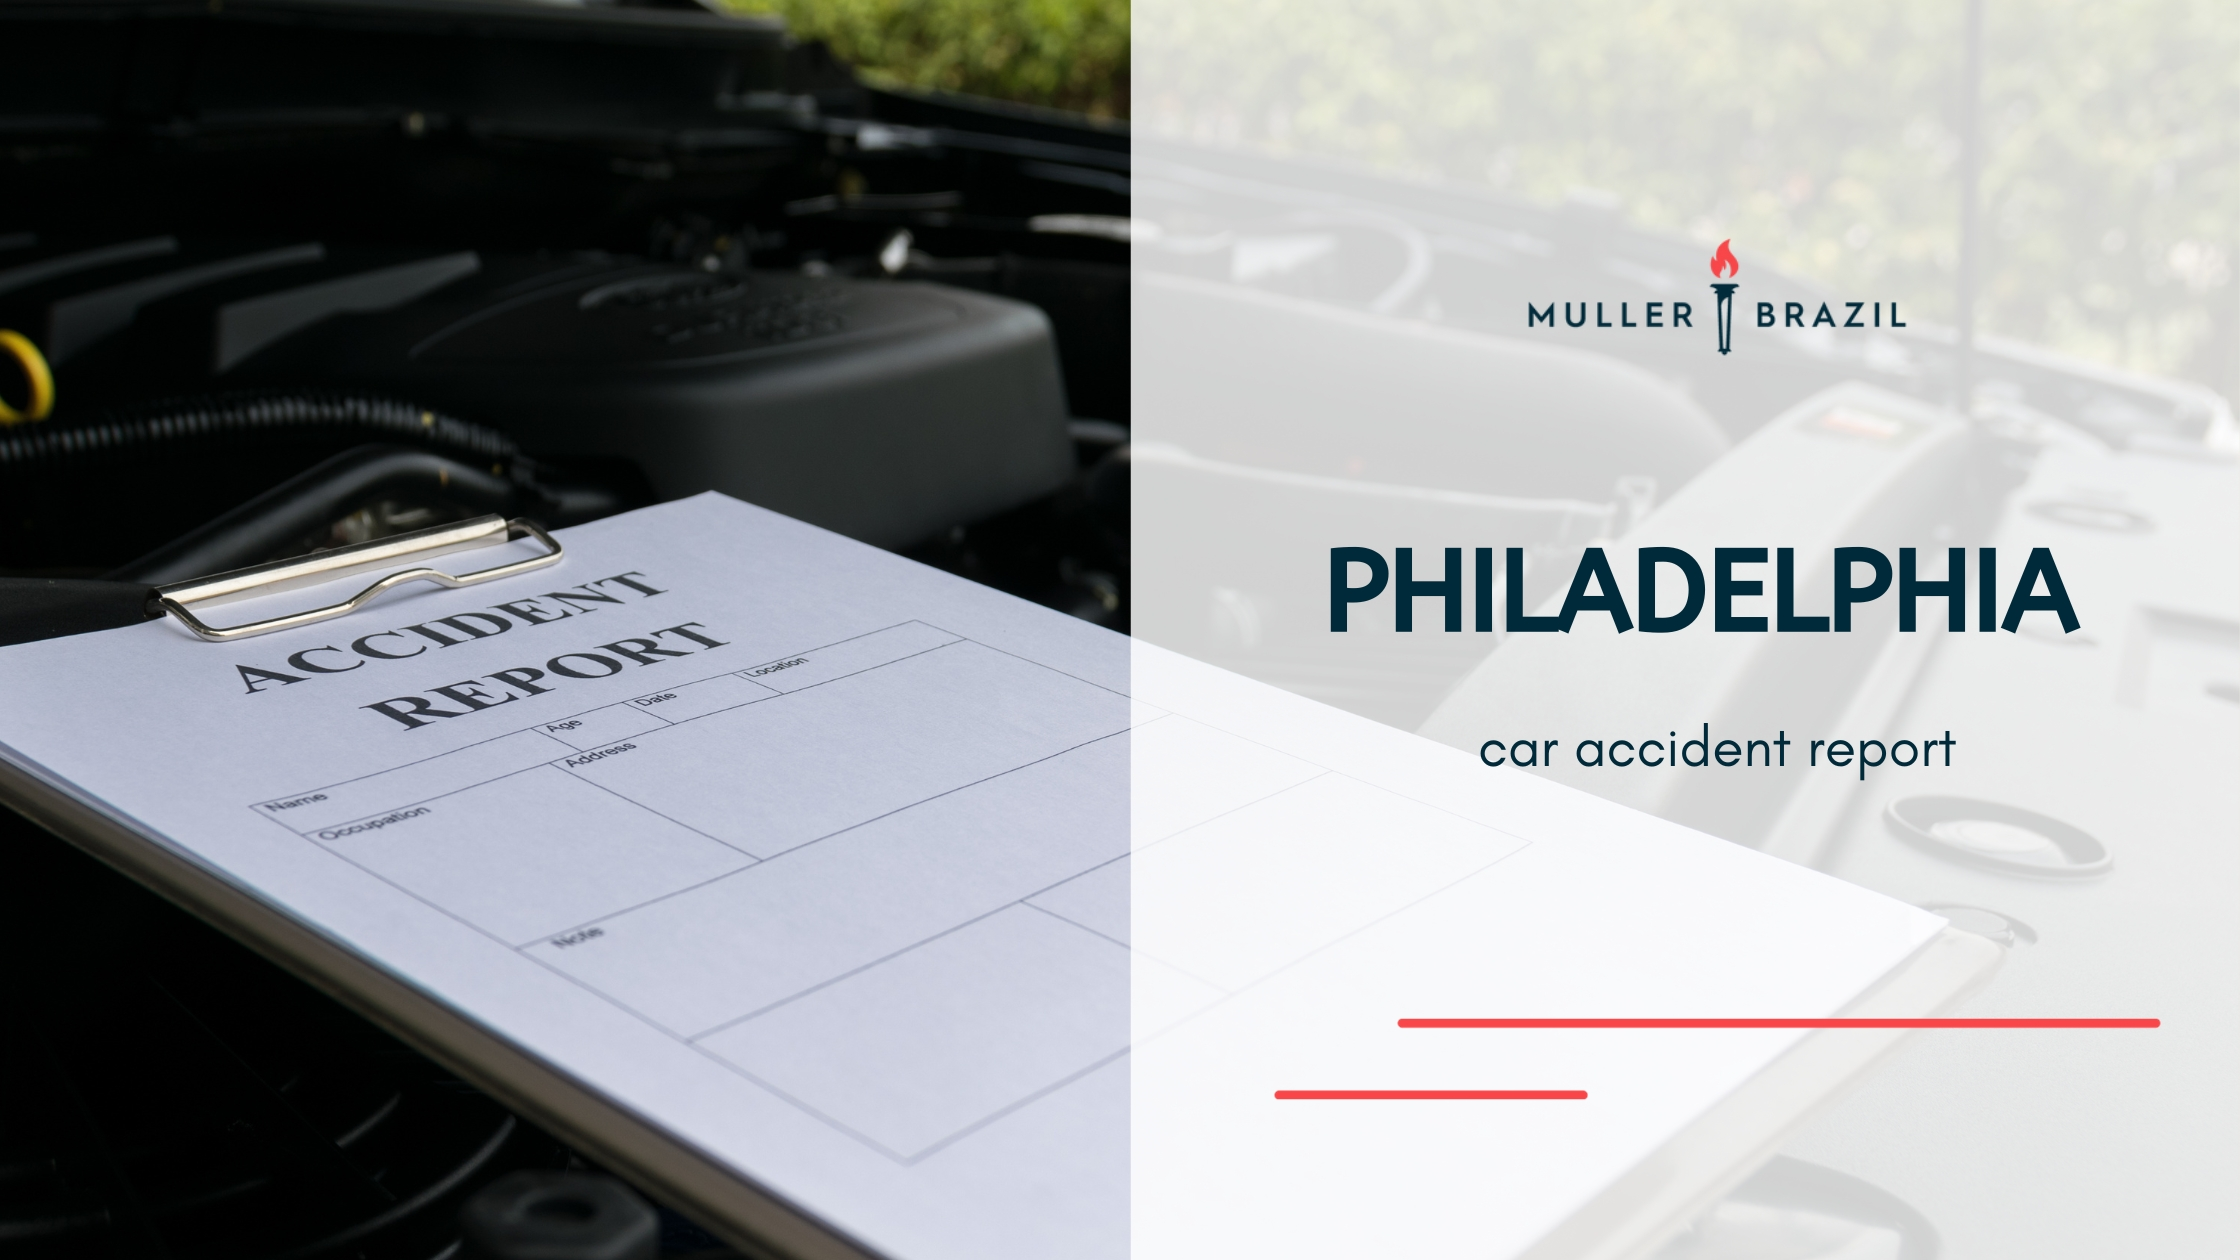 Philadelphia Car Accident Report clipboard on a car engine with the Muller Brazil logo in the background